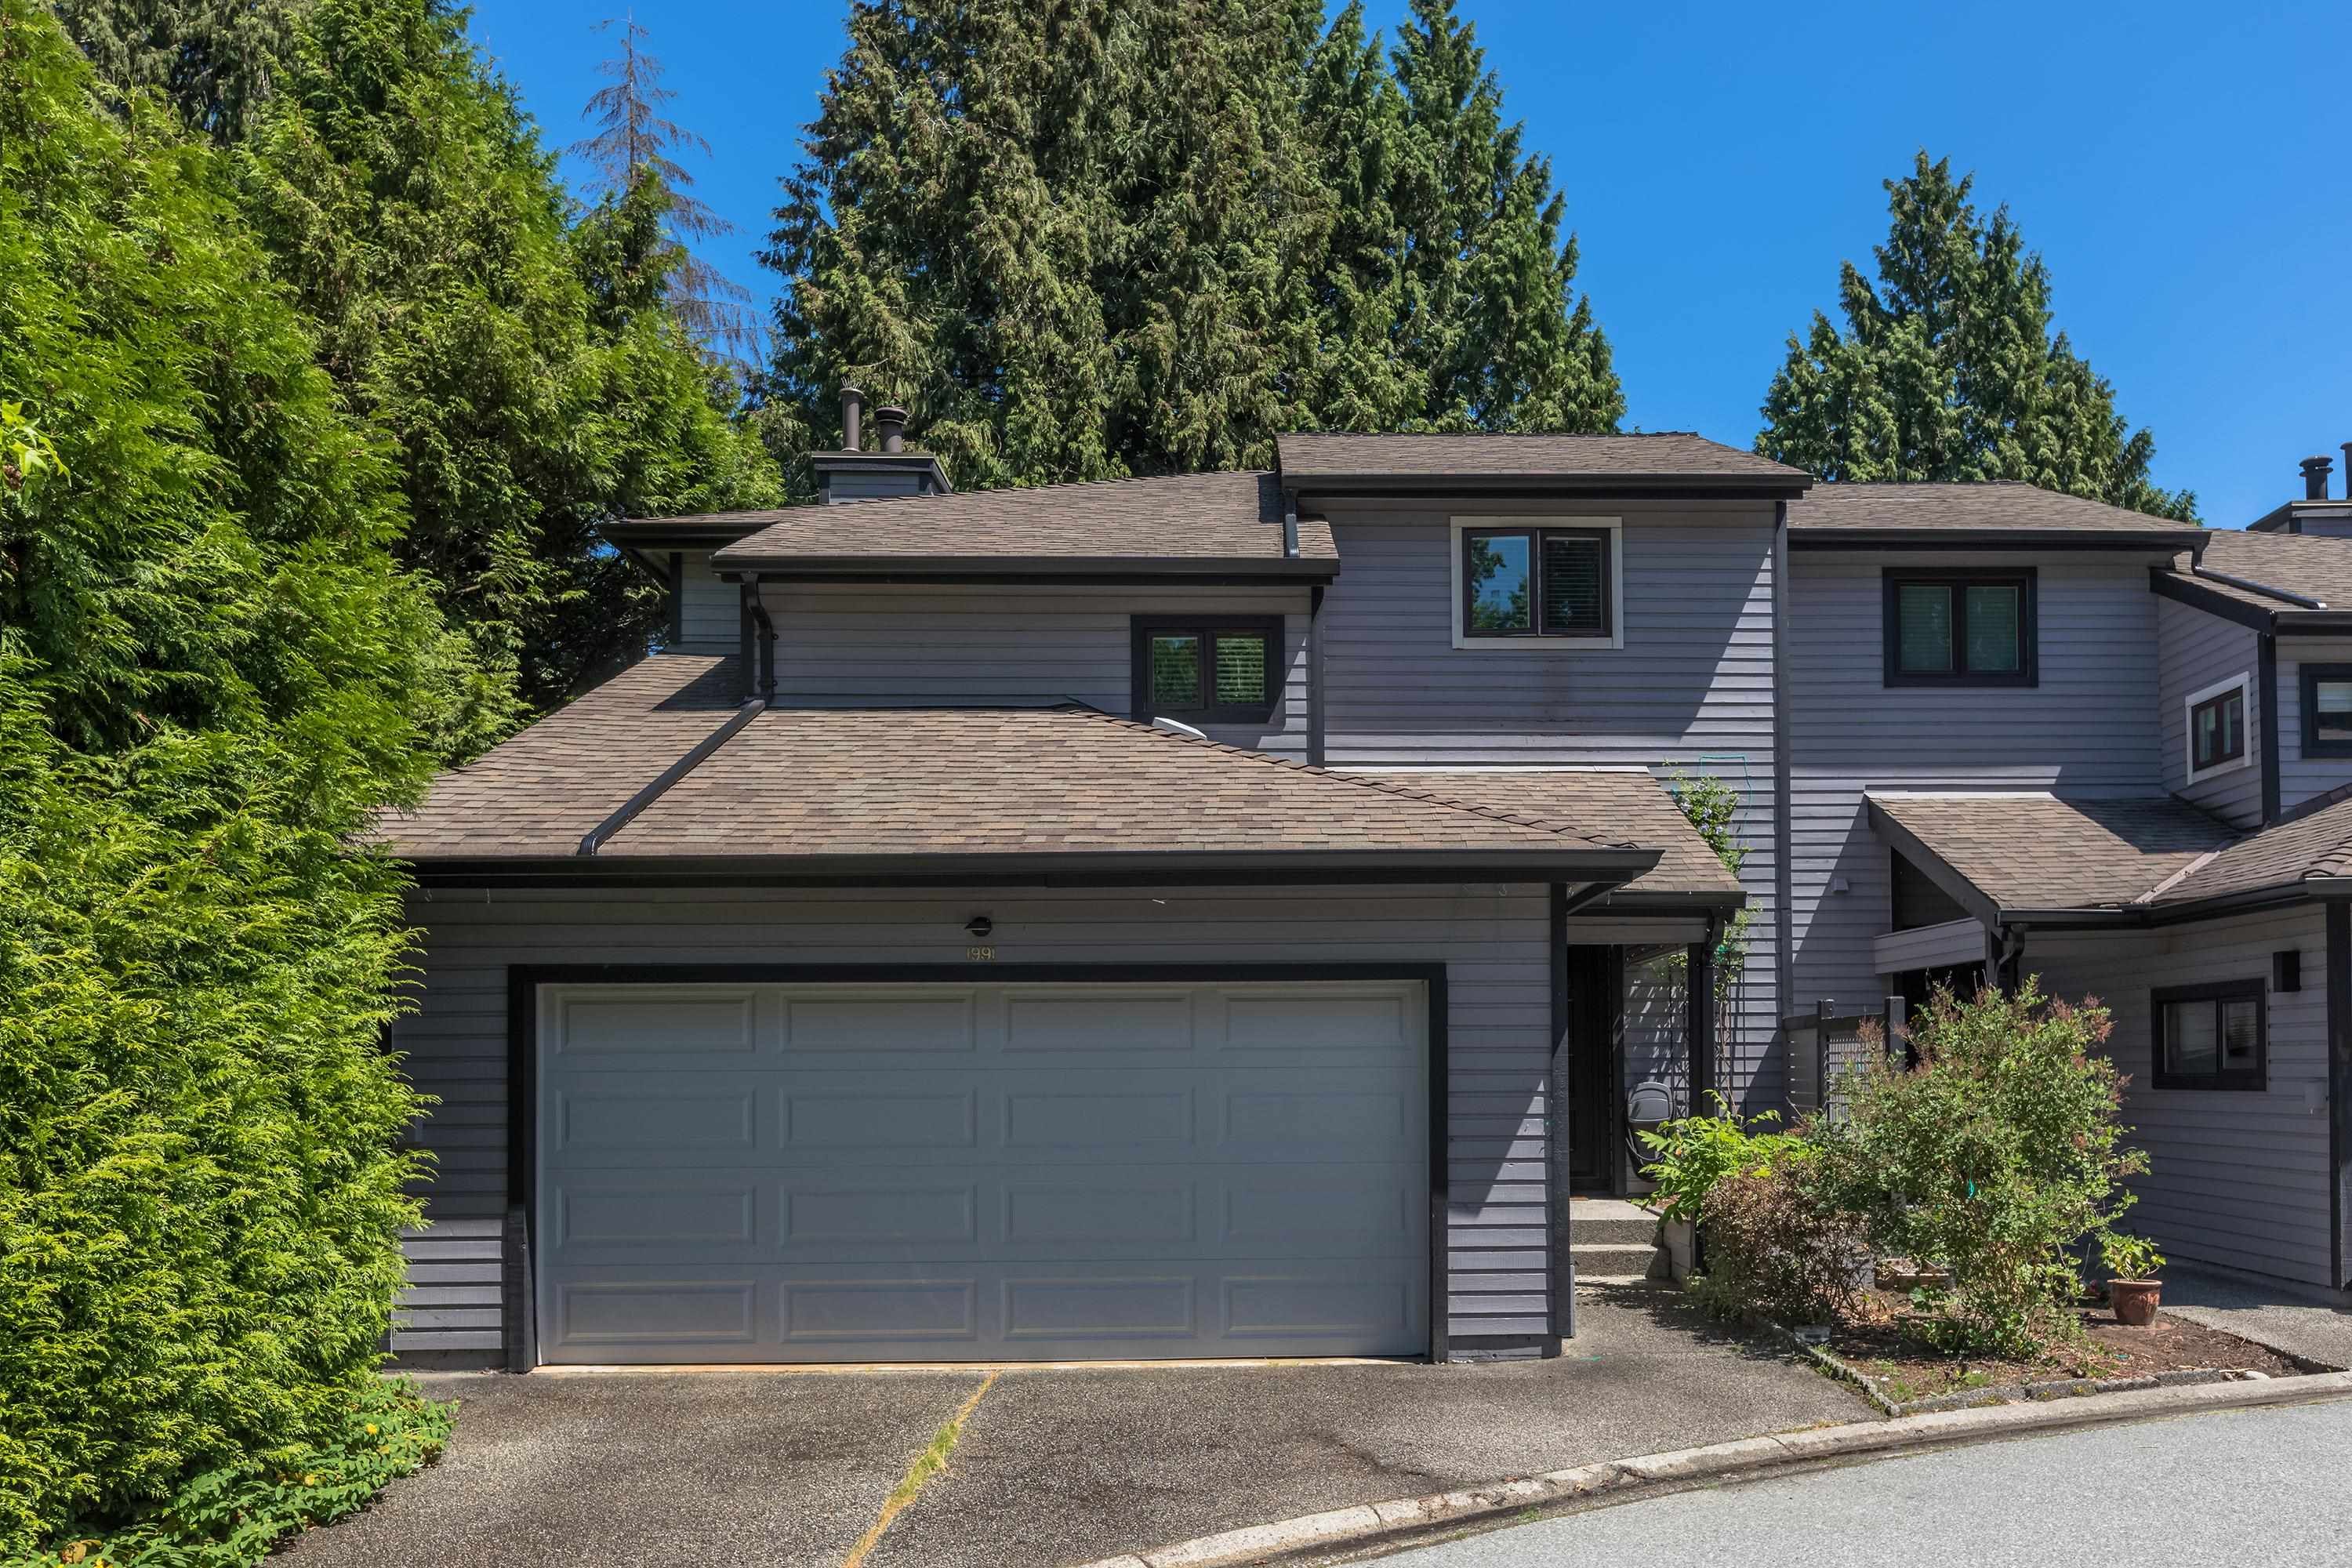 New property listed at 1991 CEDAR VILLAGE CRES in North Vancouver